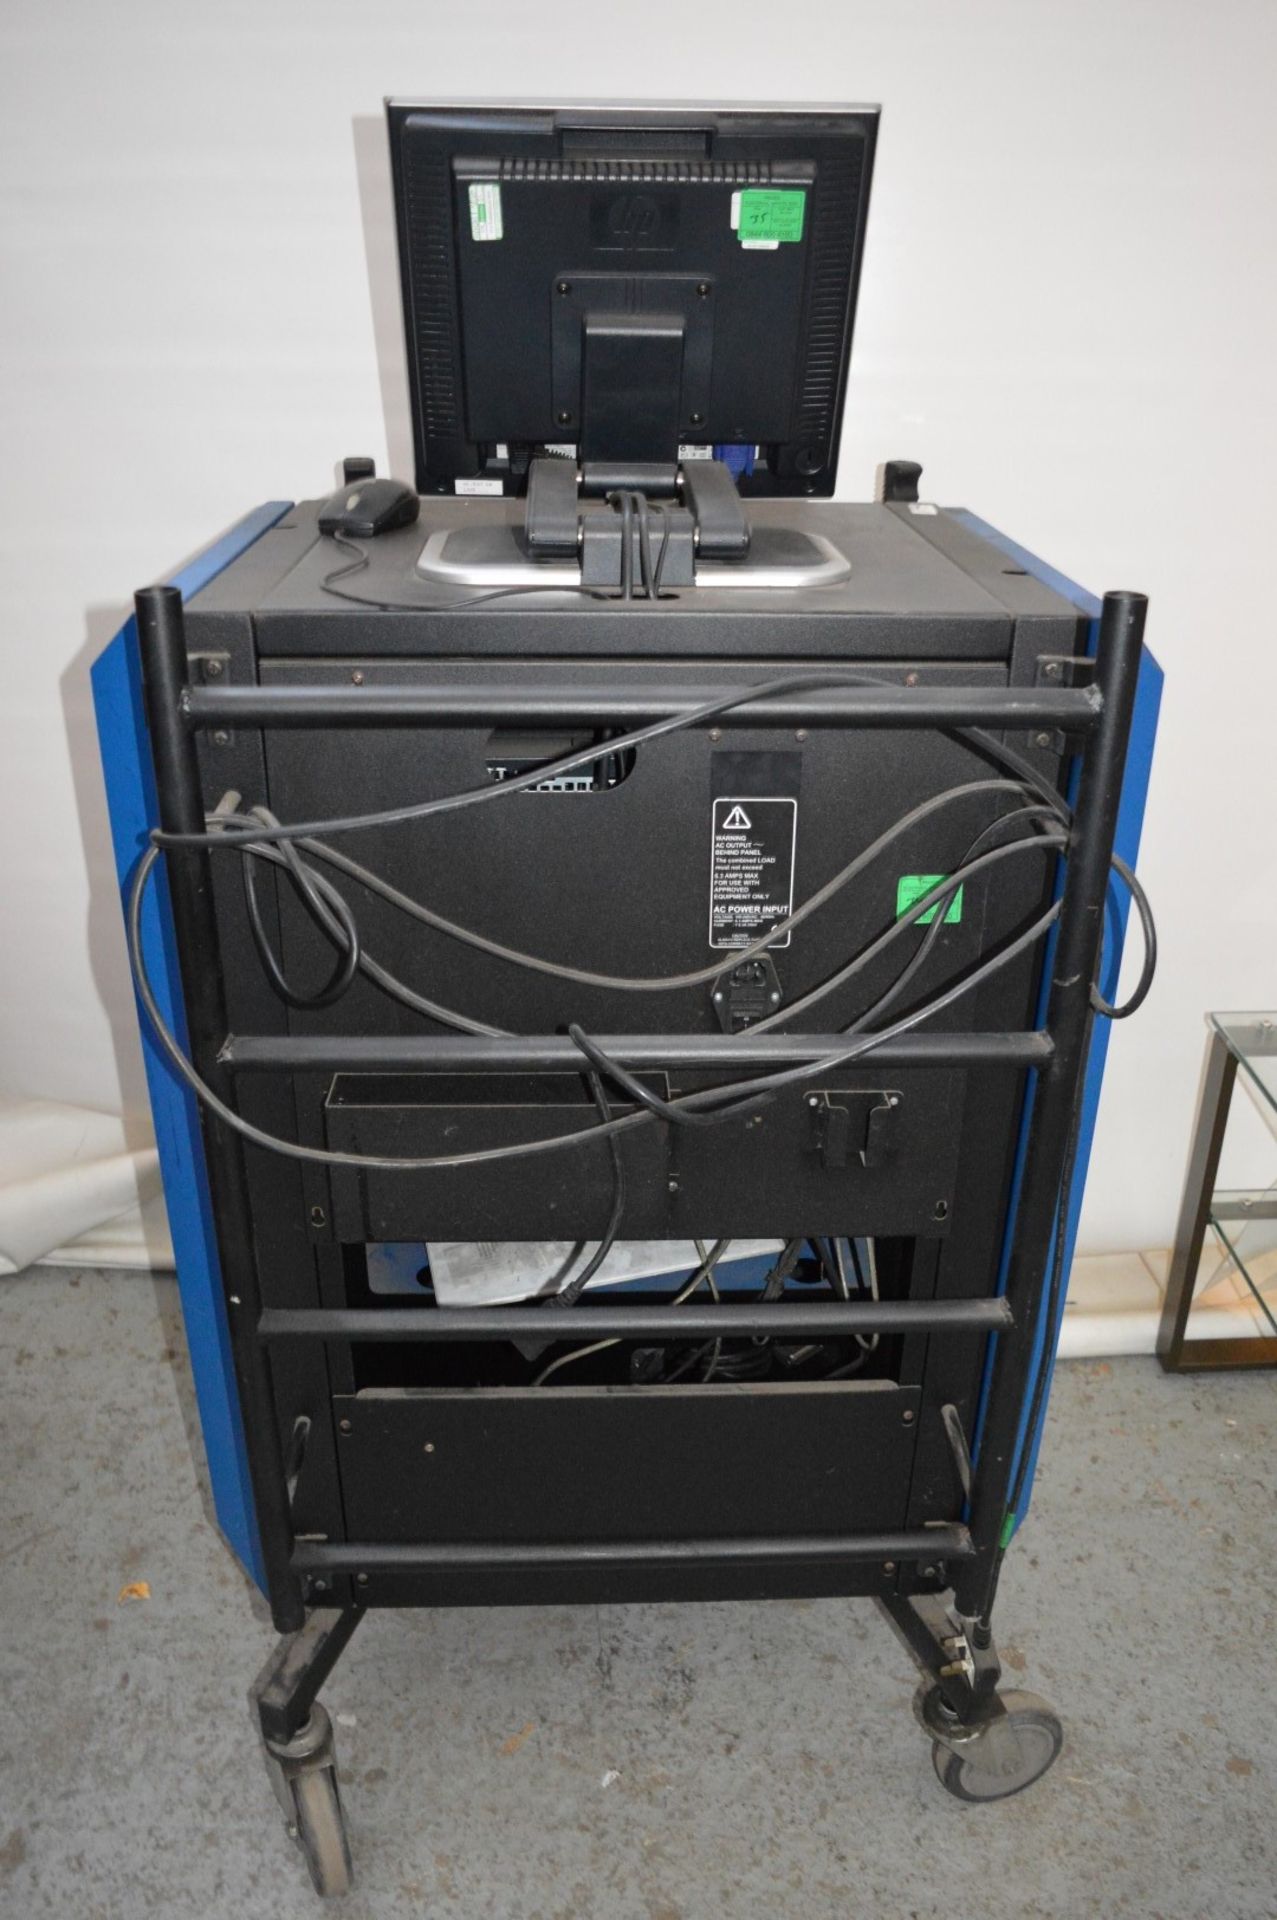 1 x Omitec OmiTechCenter Automotive Diagnostic Workstation - Please View The Pictures Provided - - Image 12 of 21